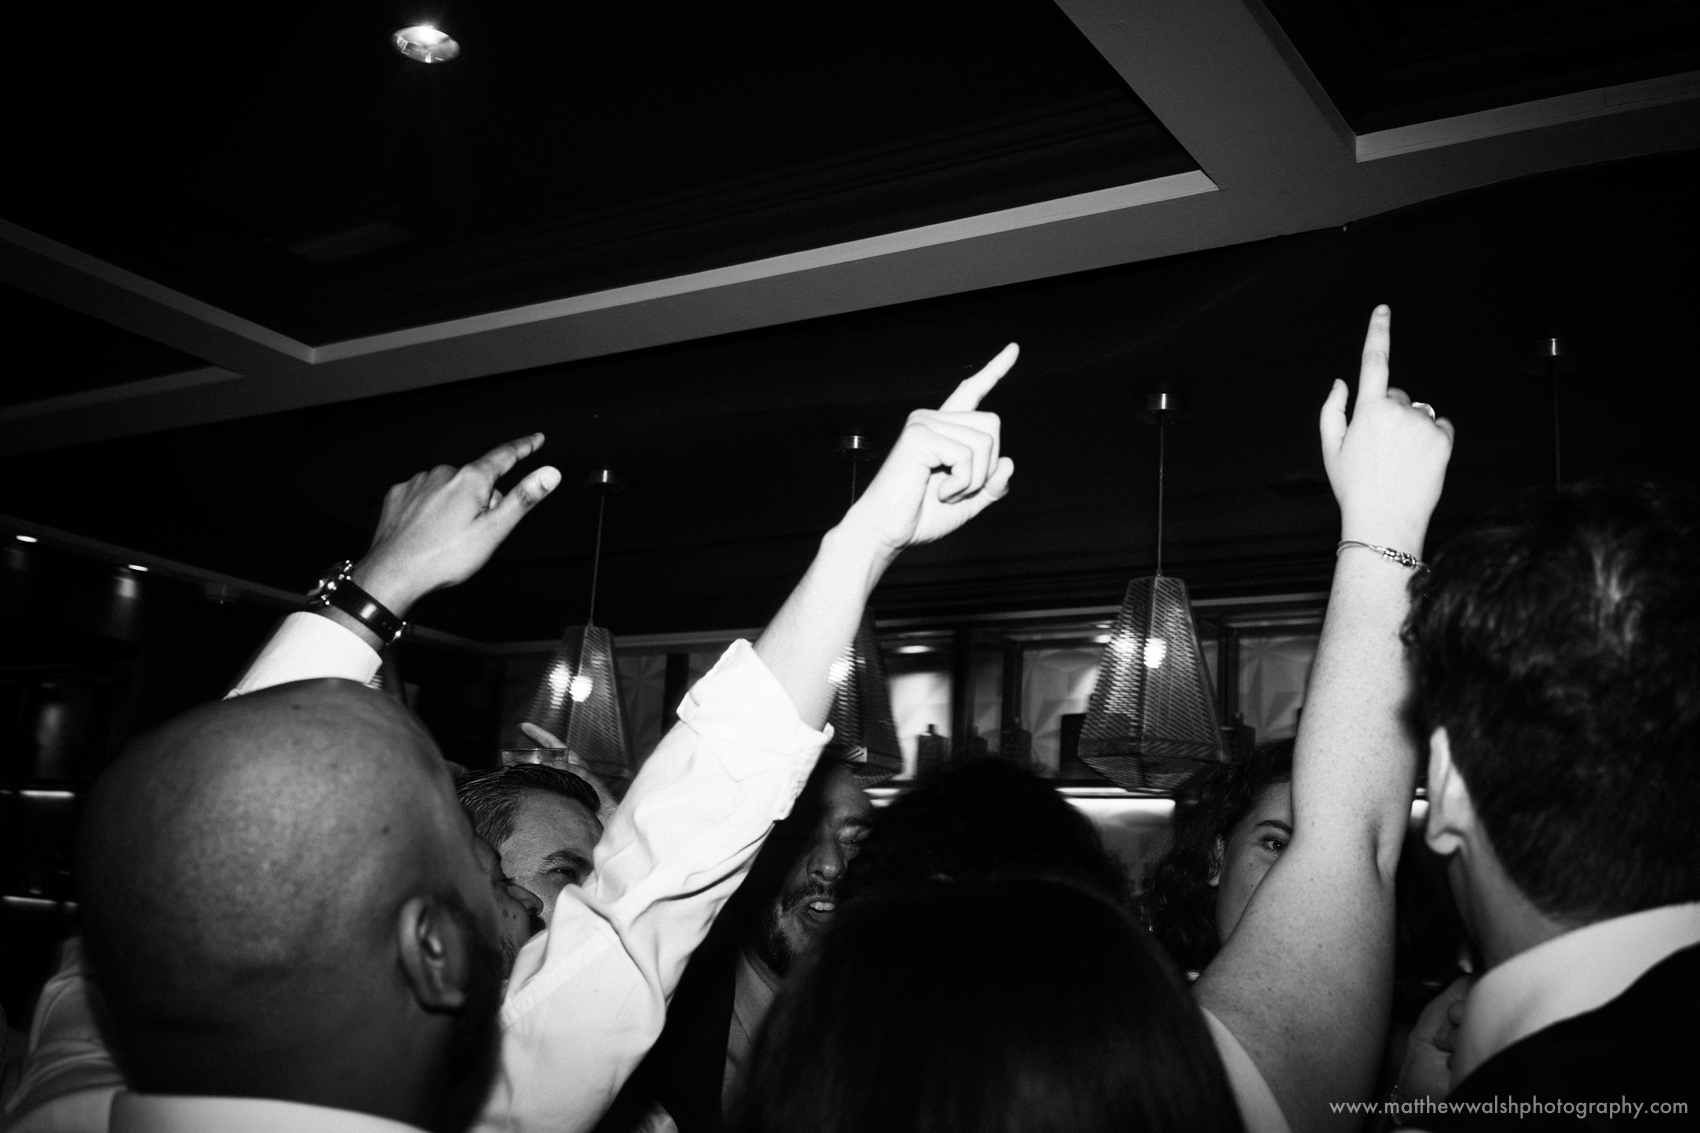 All hands in the air at the living room bar in Central Manchester